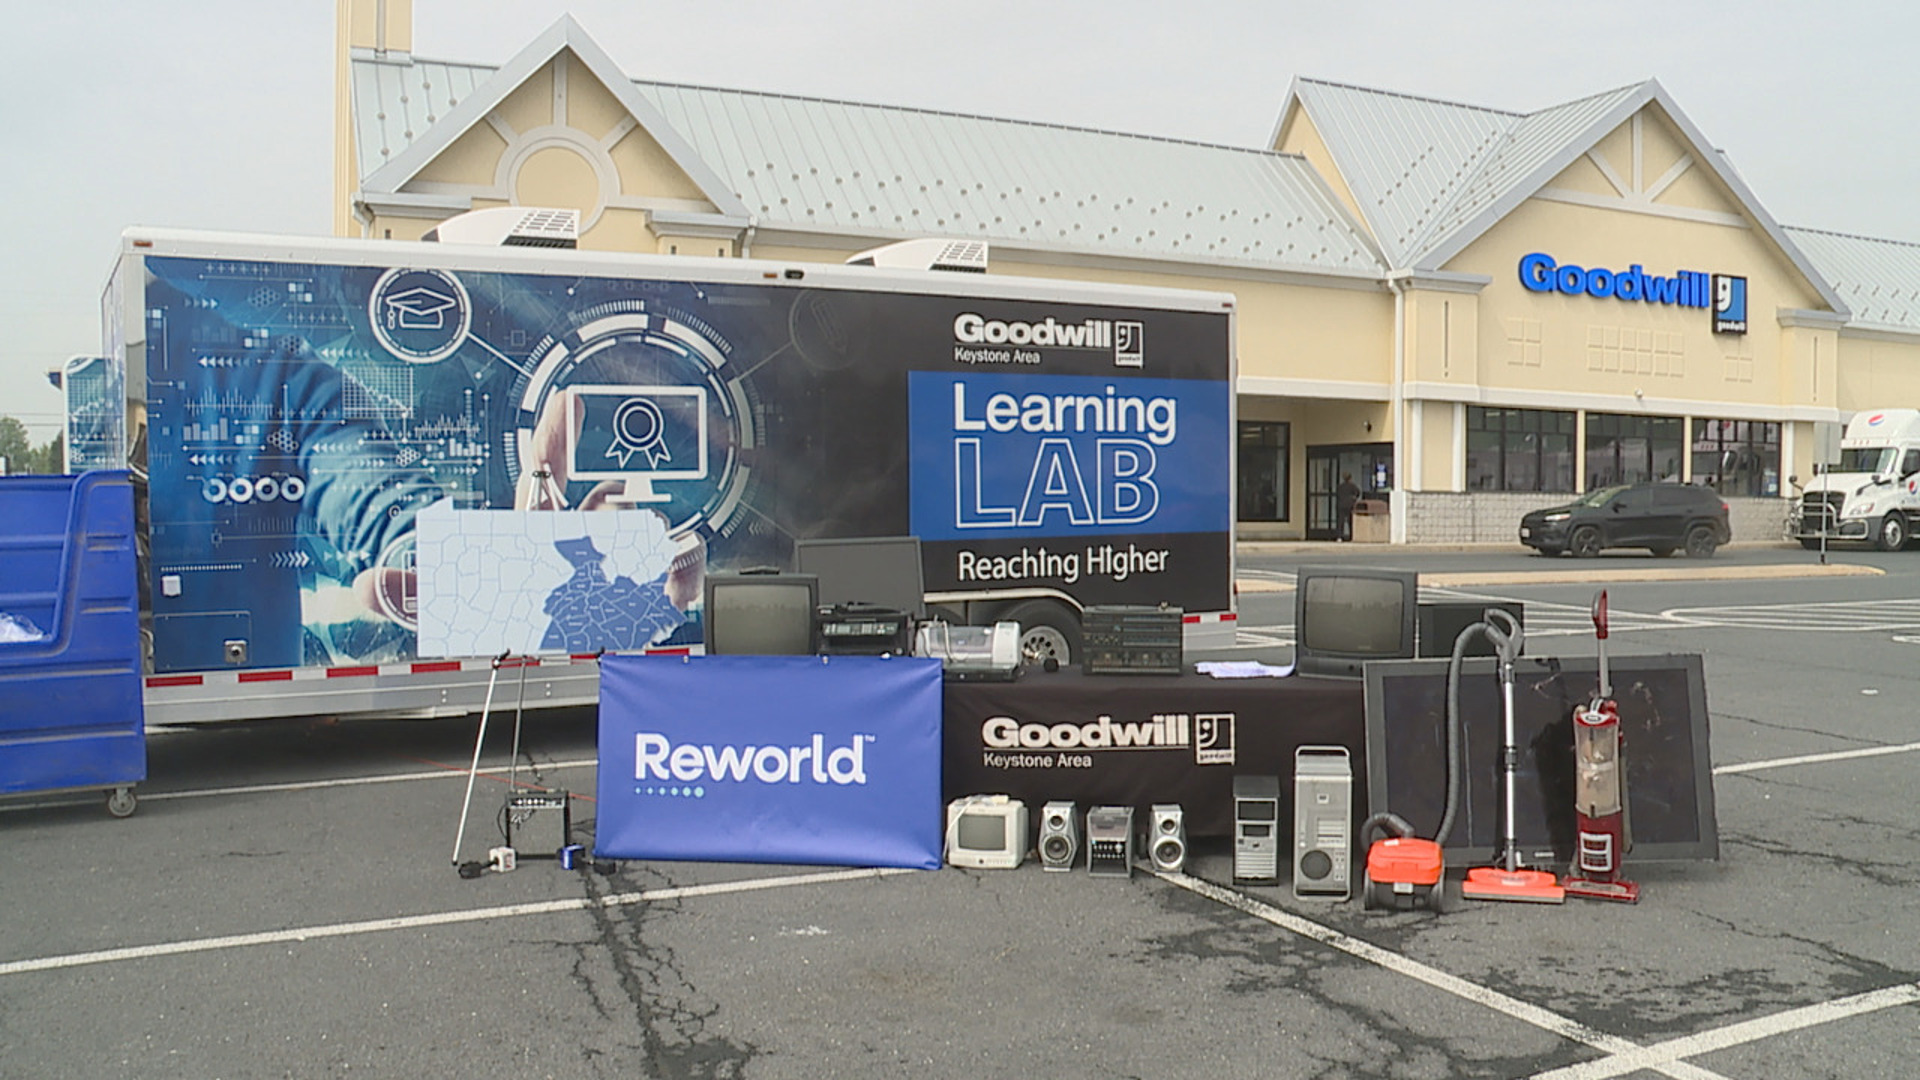 Goodwill Keystone Area is offering a new way to get rid of unwanted electronics at no cost to Pennsylvanians.